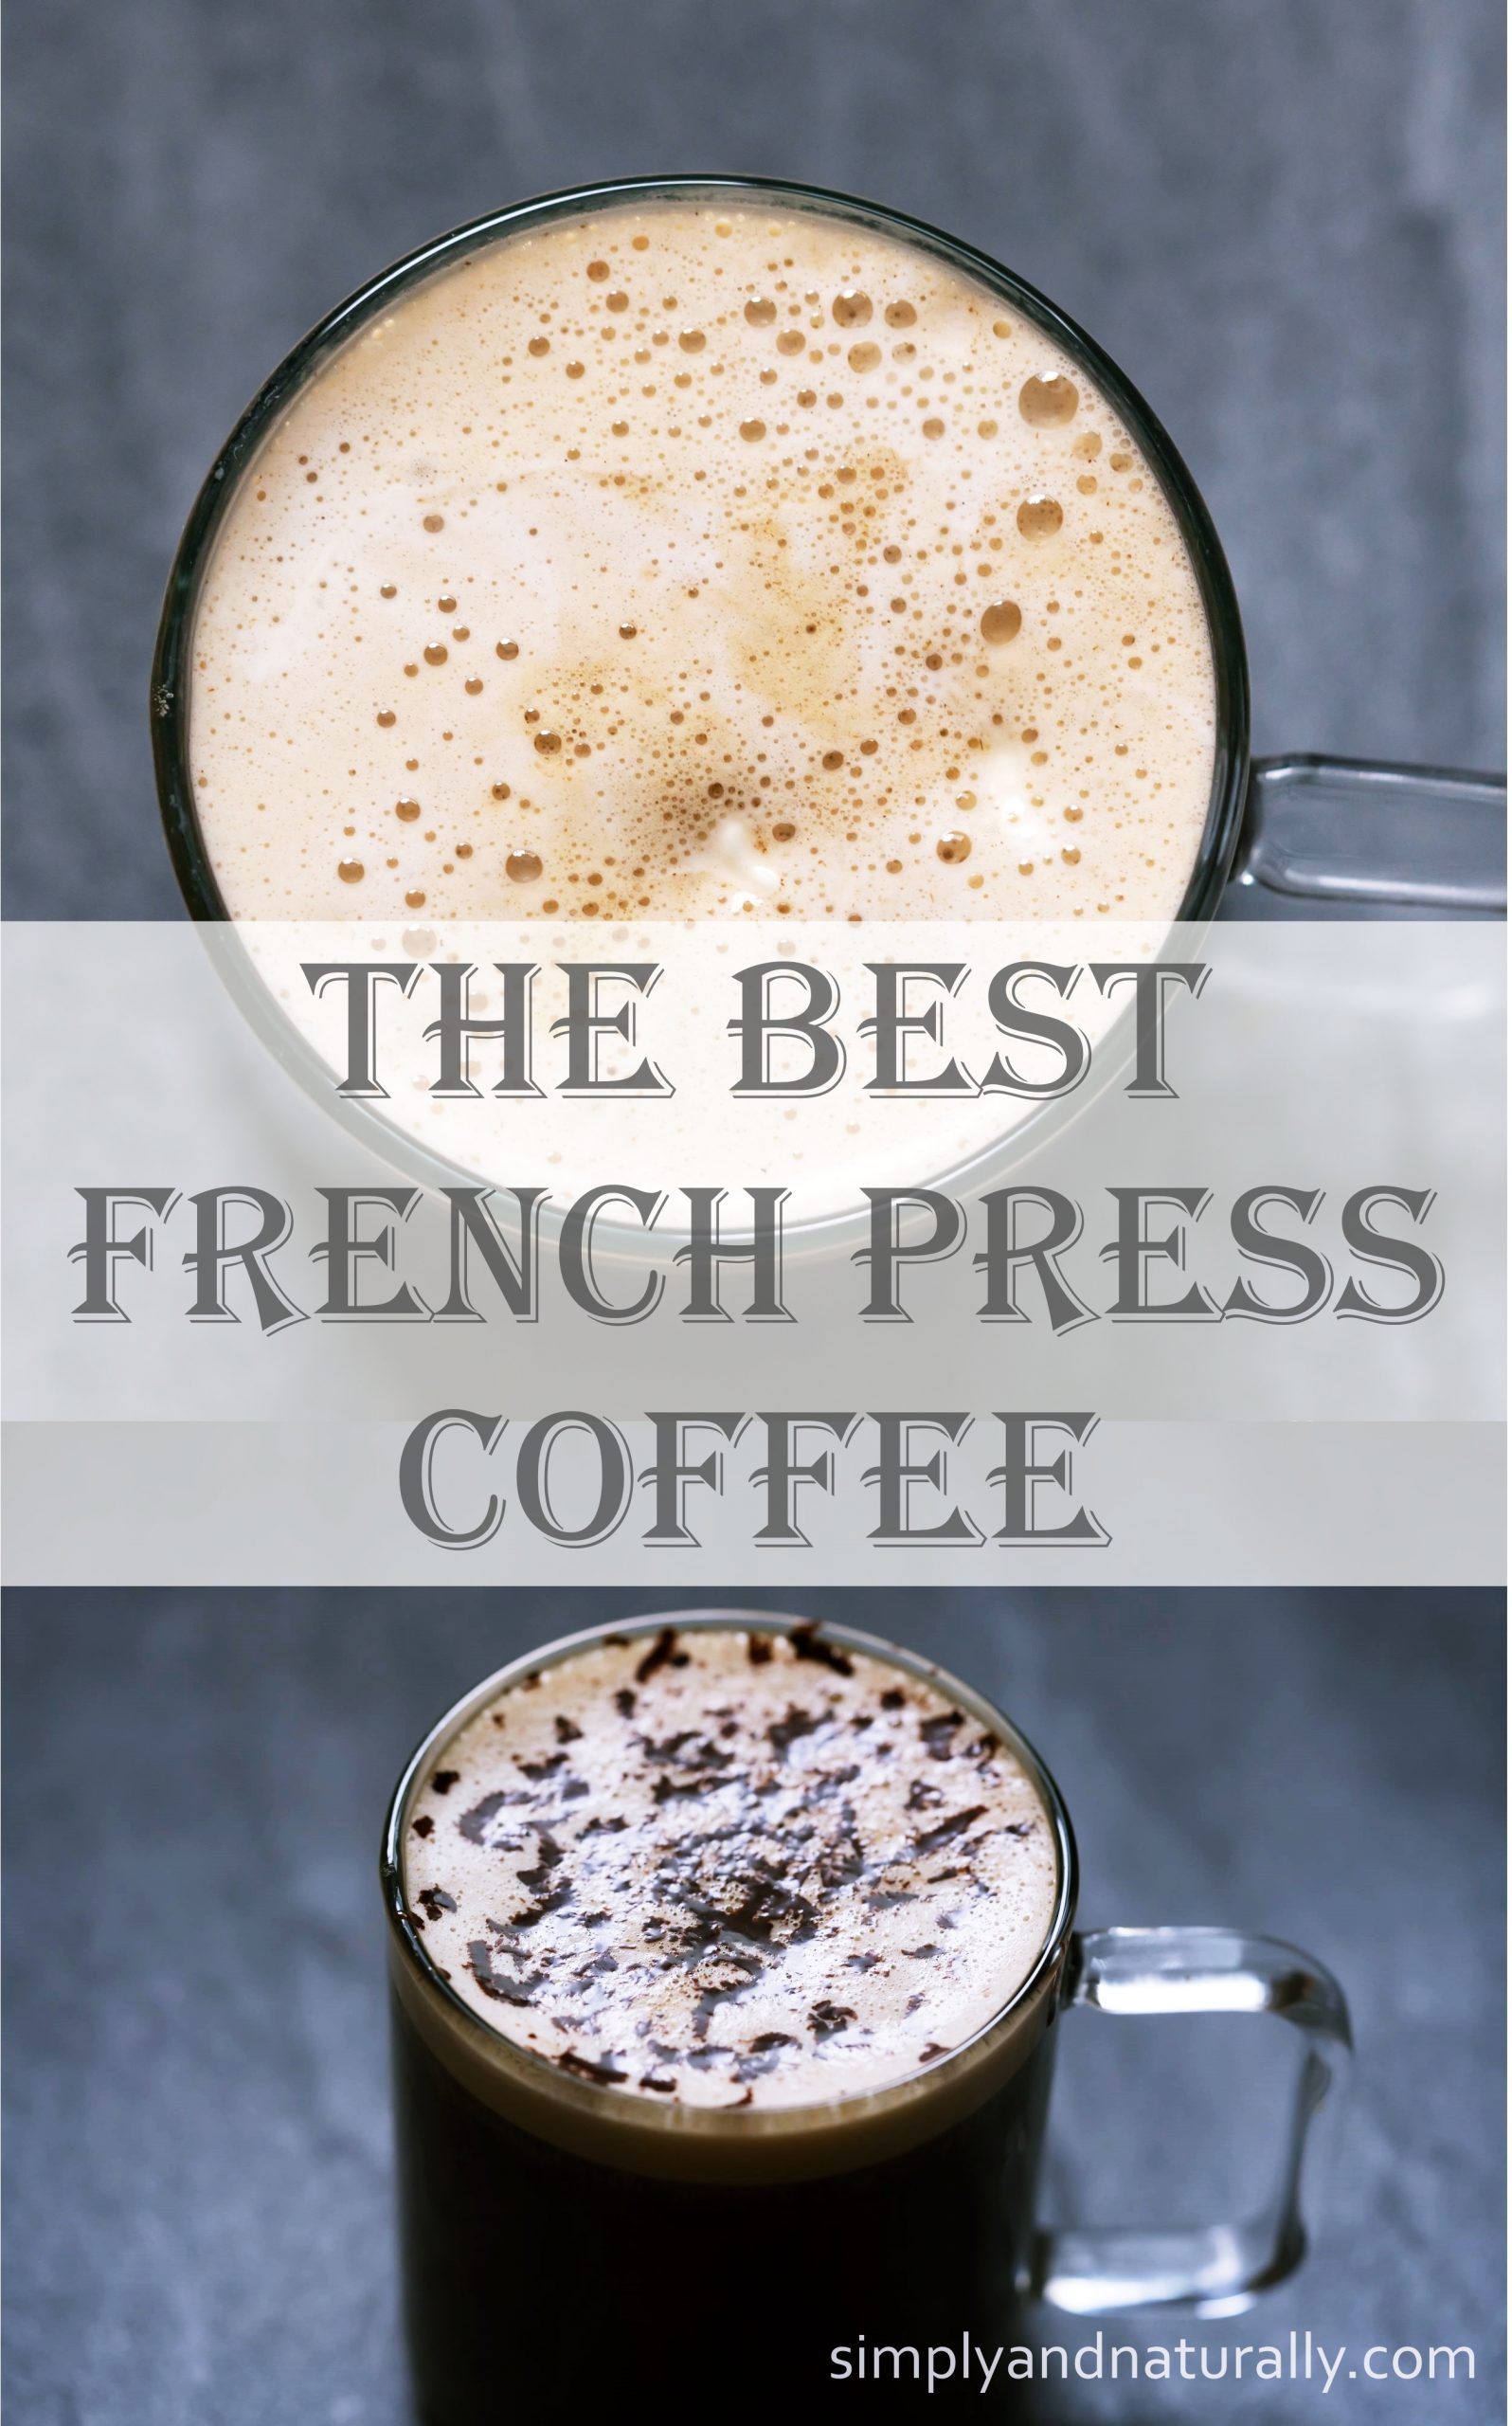 The Best French Press Coffee